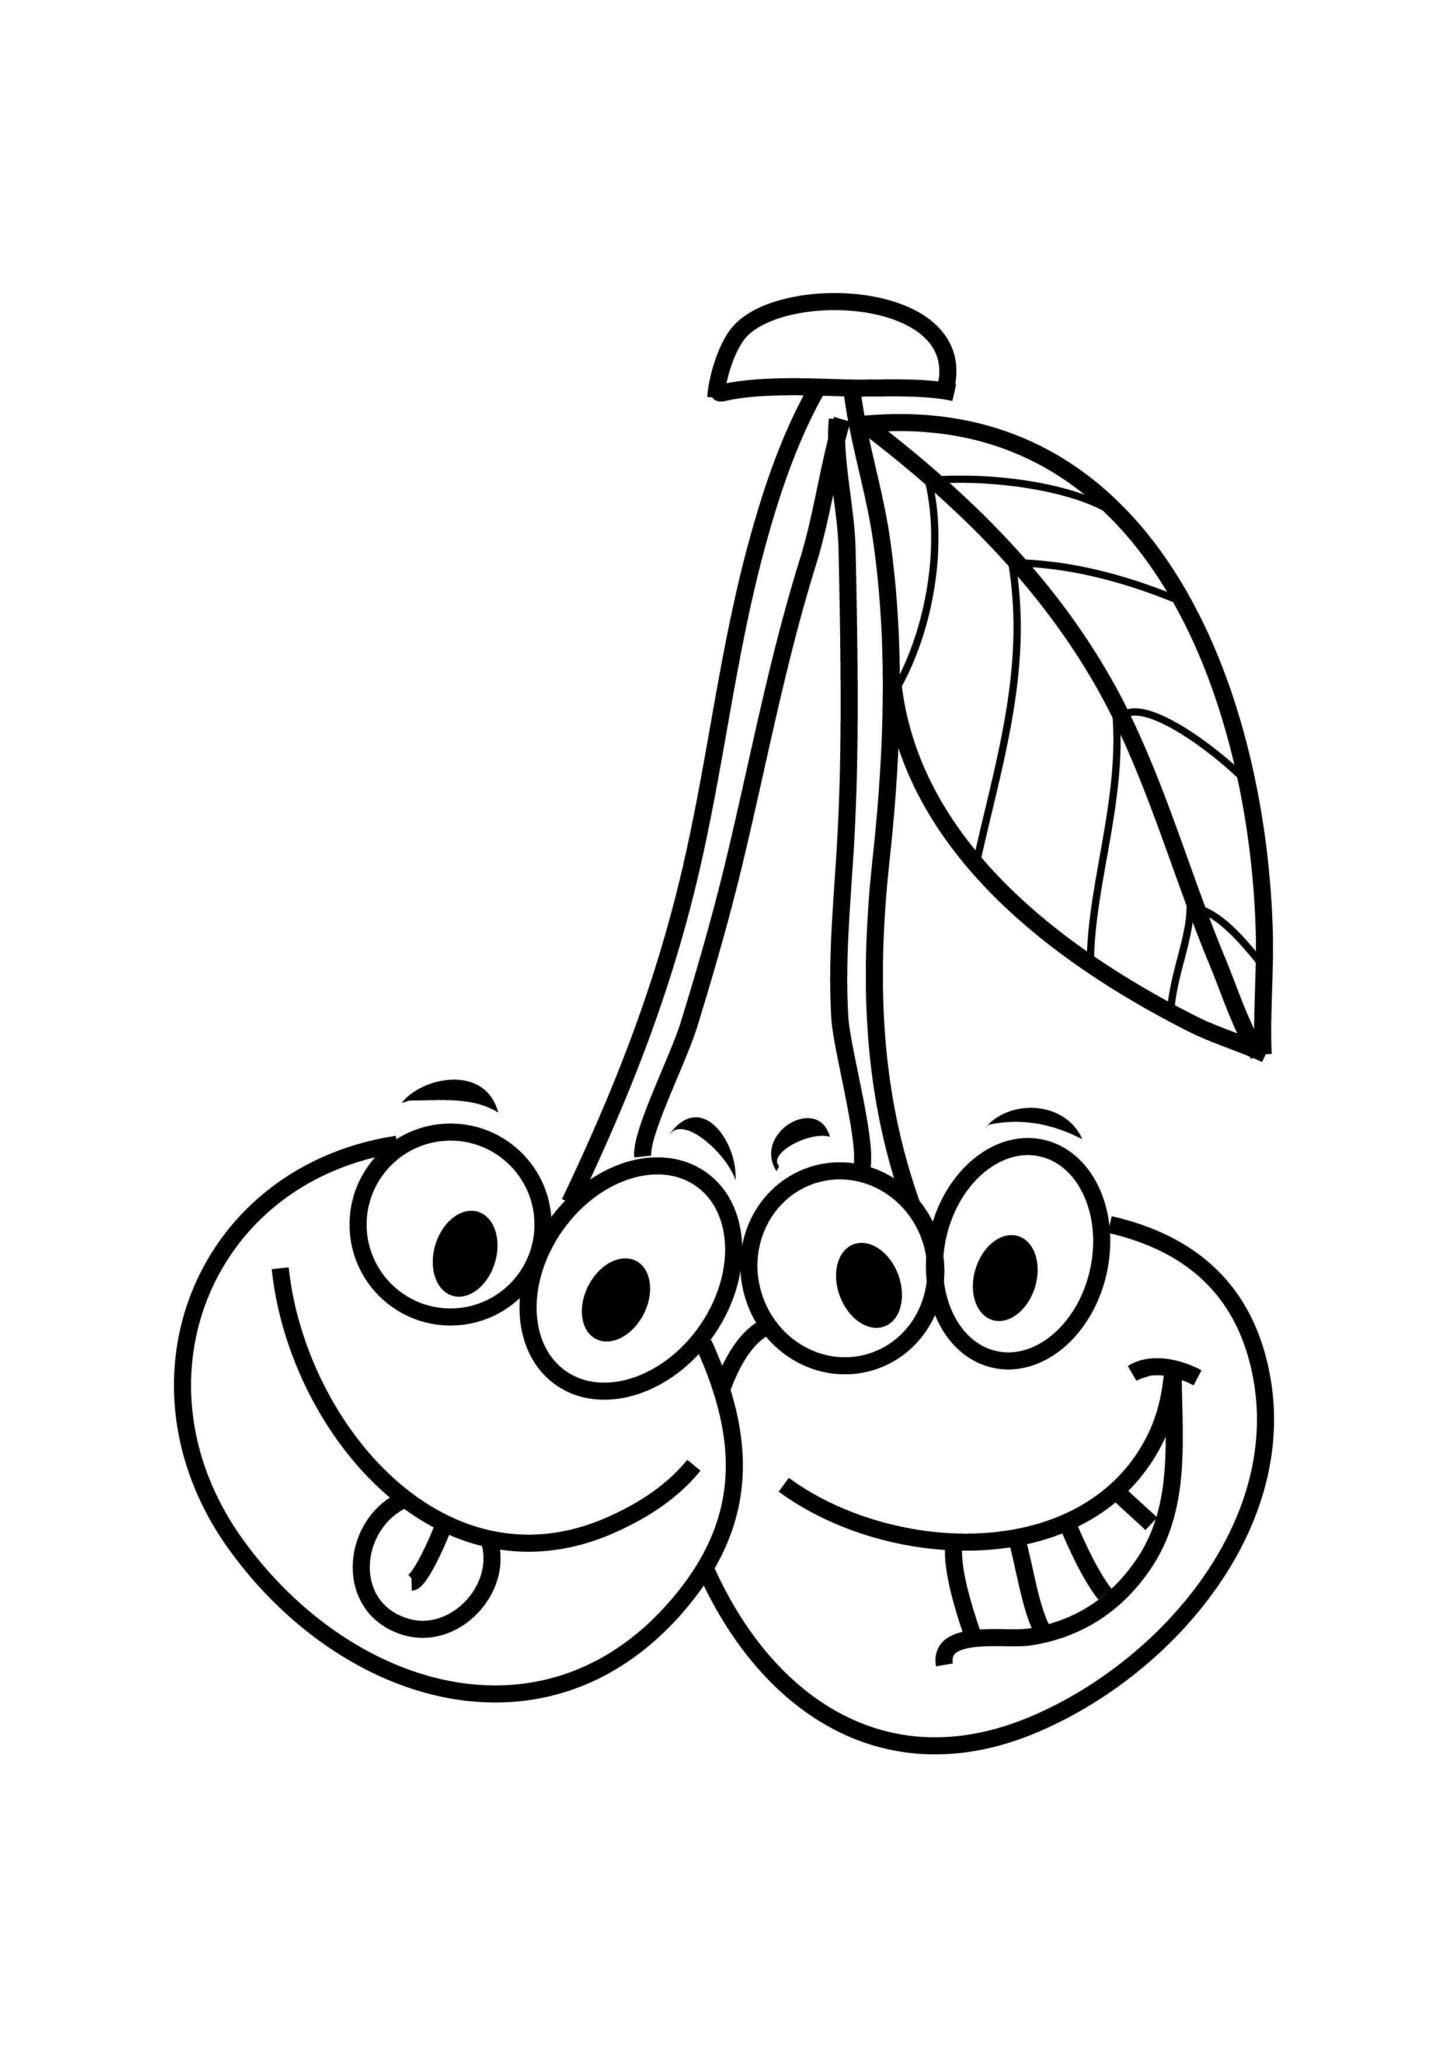 Let's Color The Sweet Fruit Coloring Pages Pdf Here - Coloringfolder.com